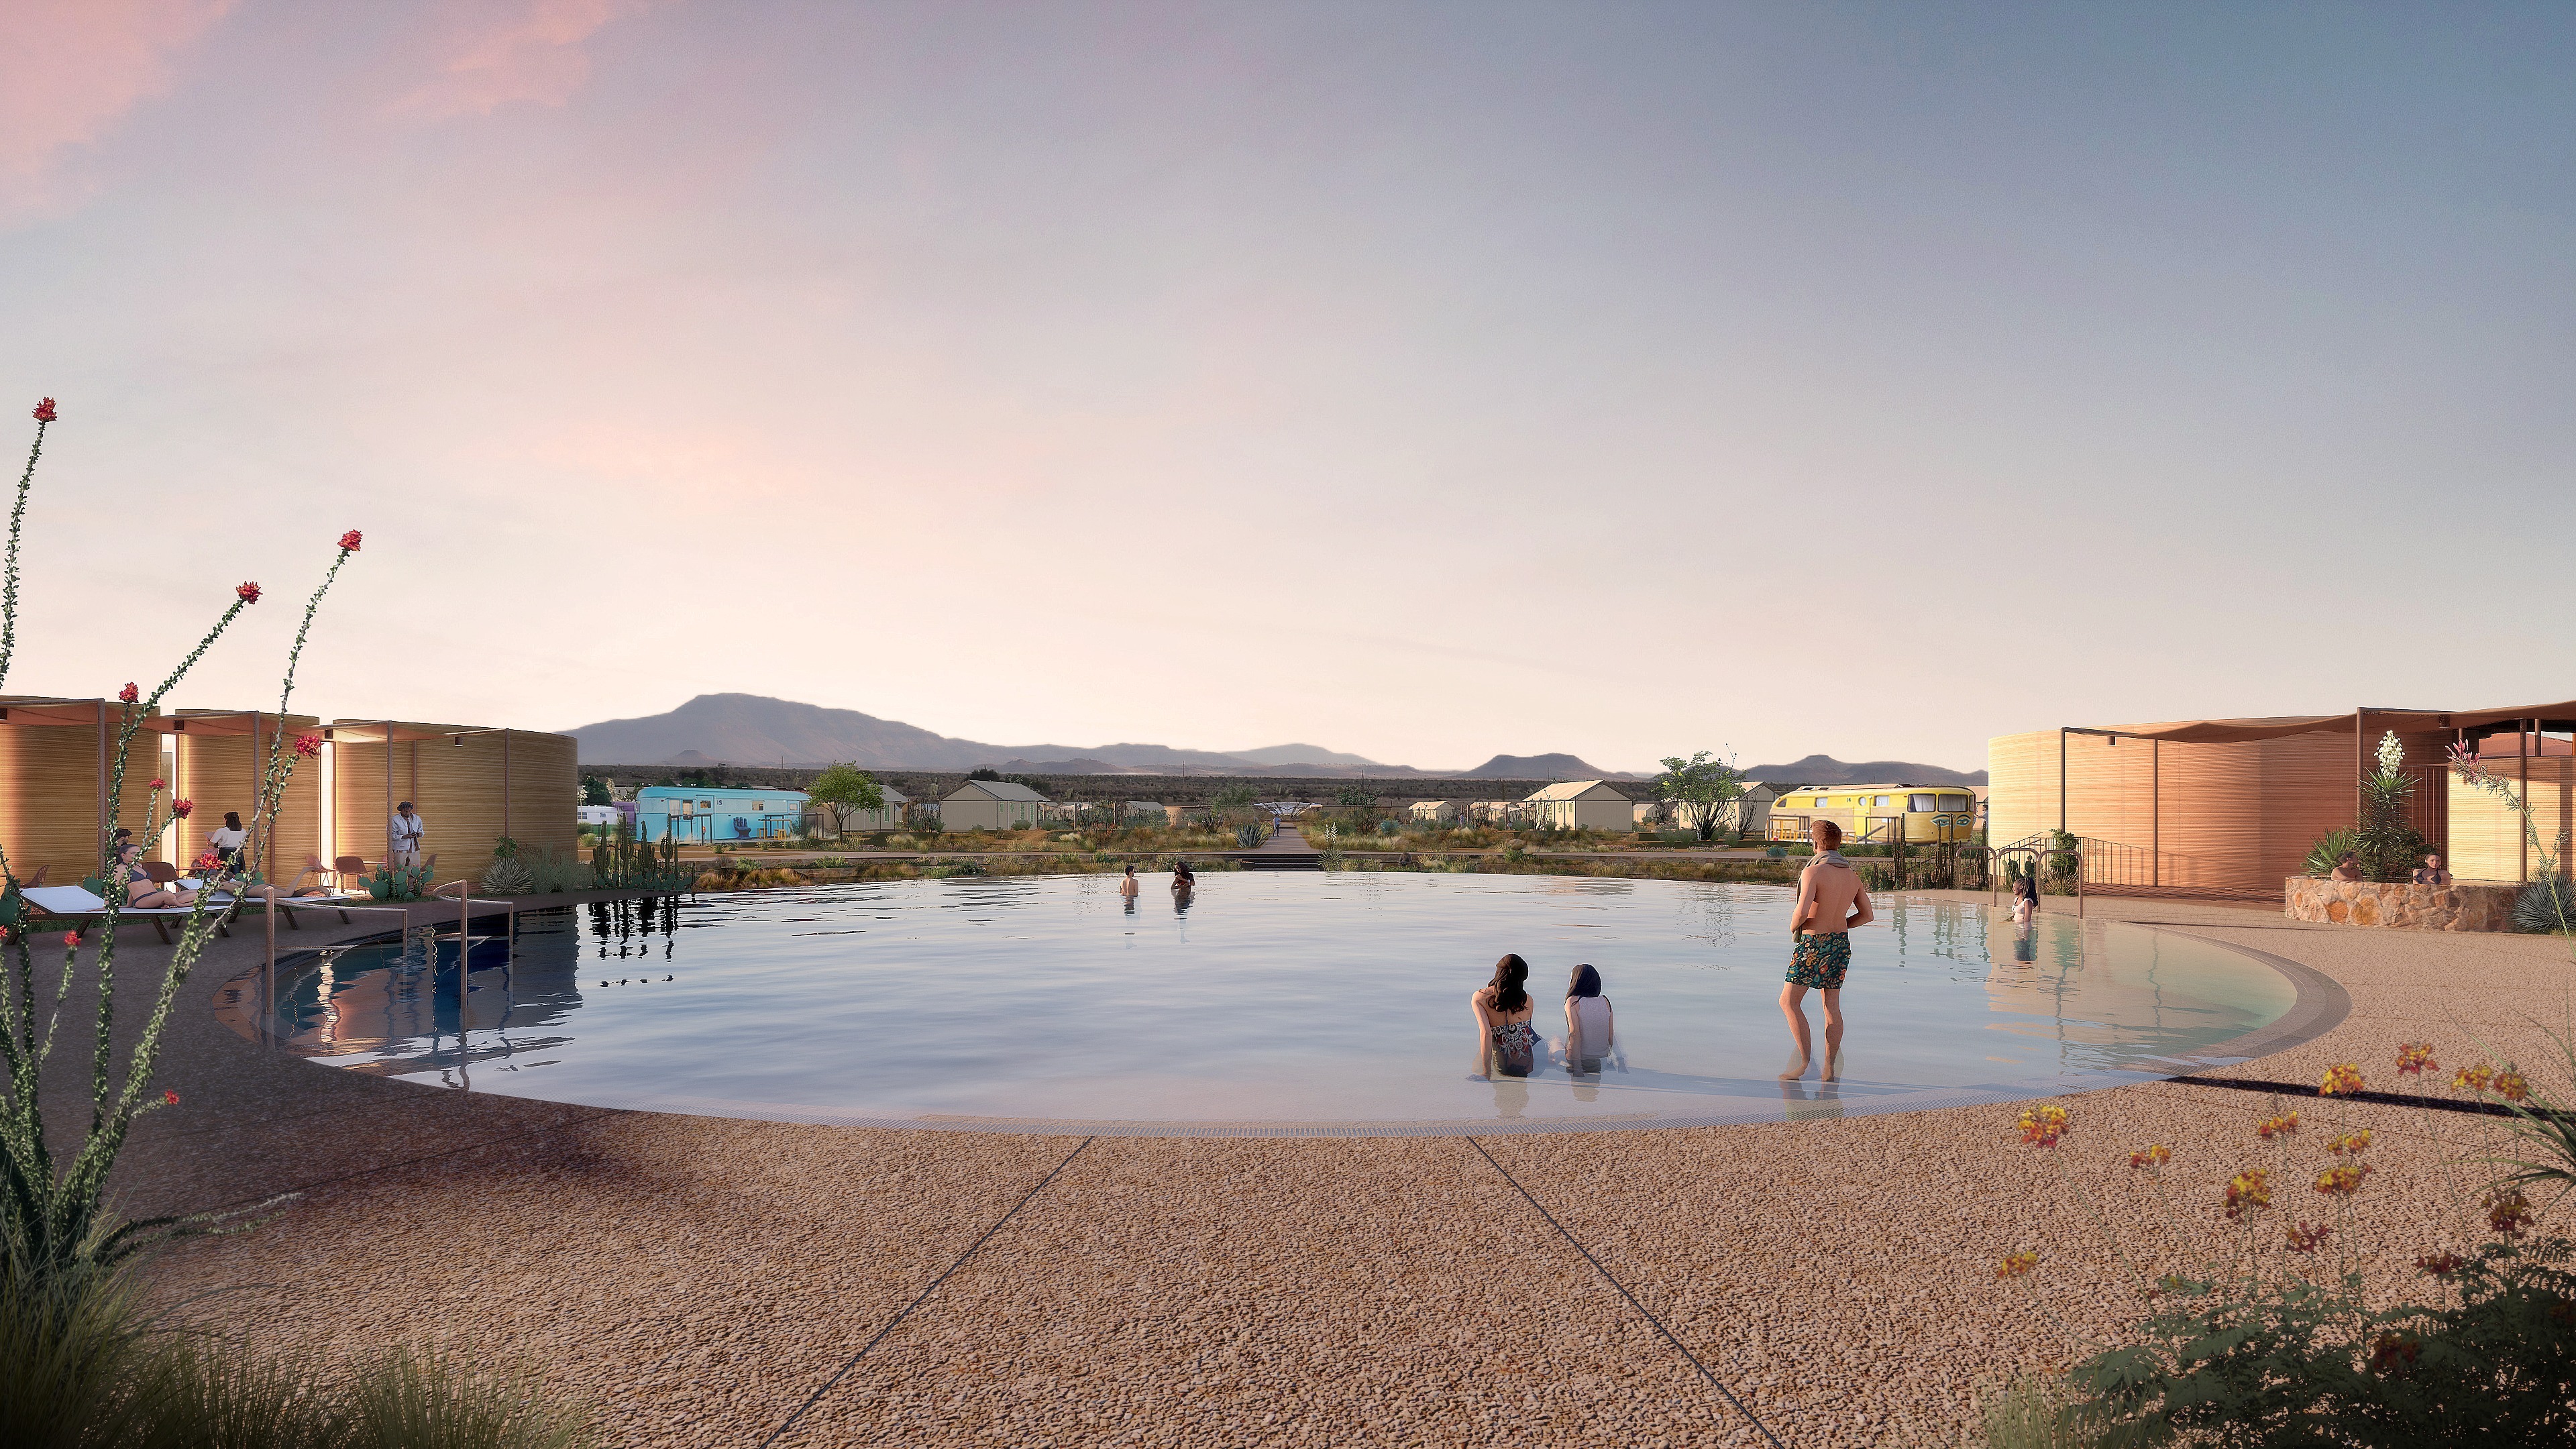 The El Cosmico resort in Marfa is shifting and expanding within the West Texas town.